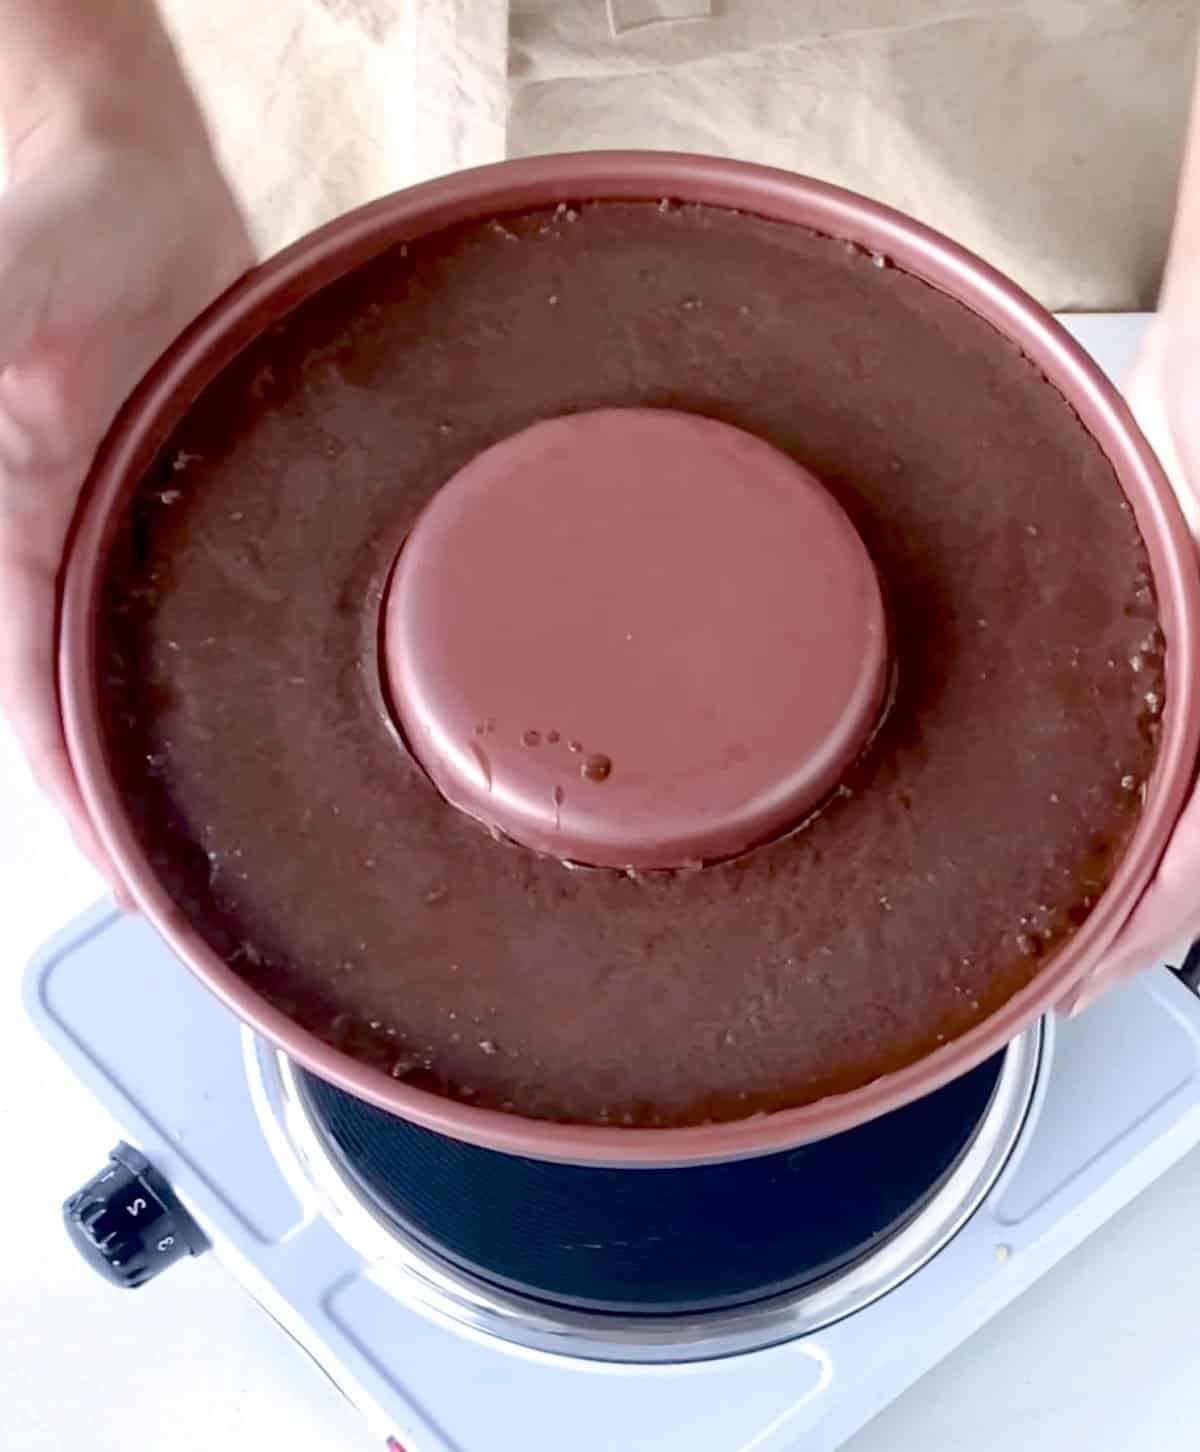 Baked chocolate flan in pan being held over single electric stove.